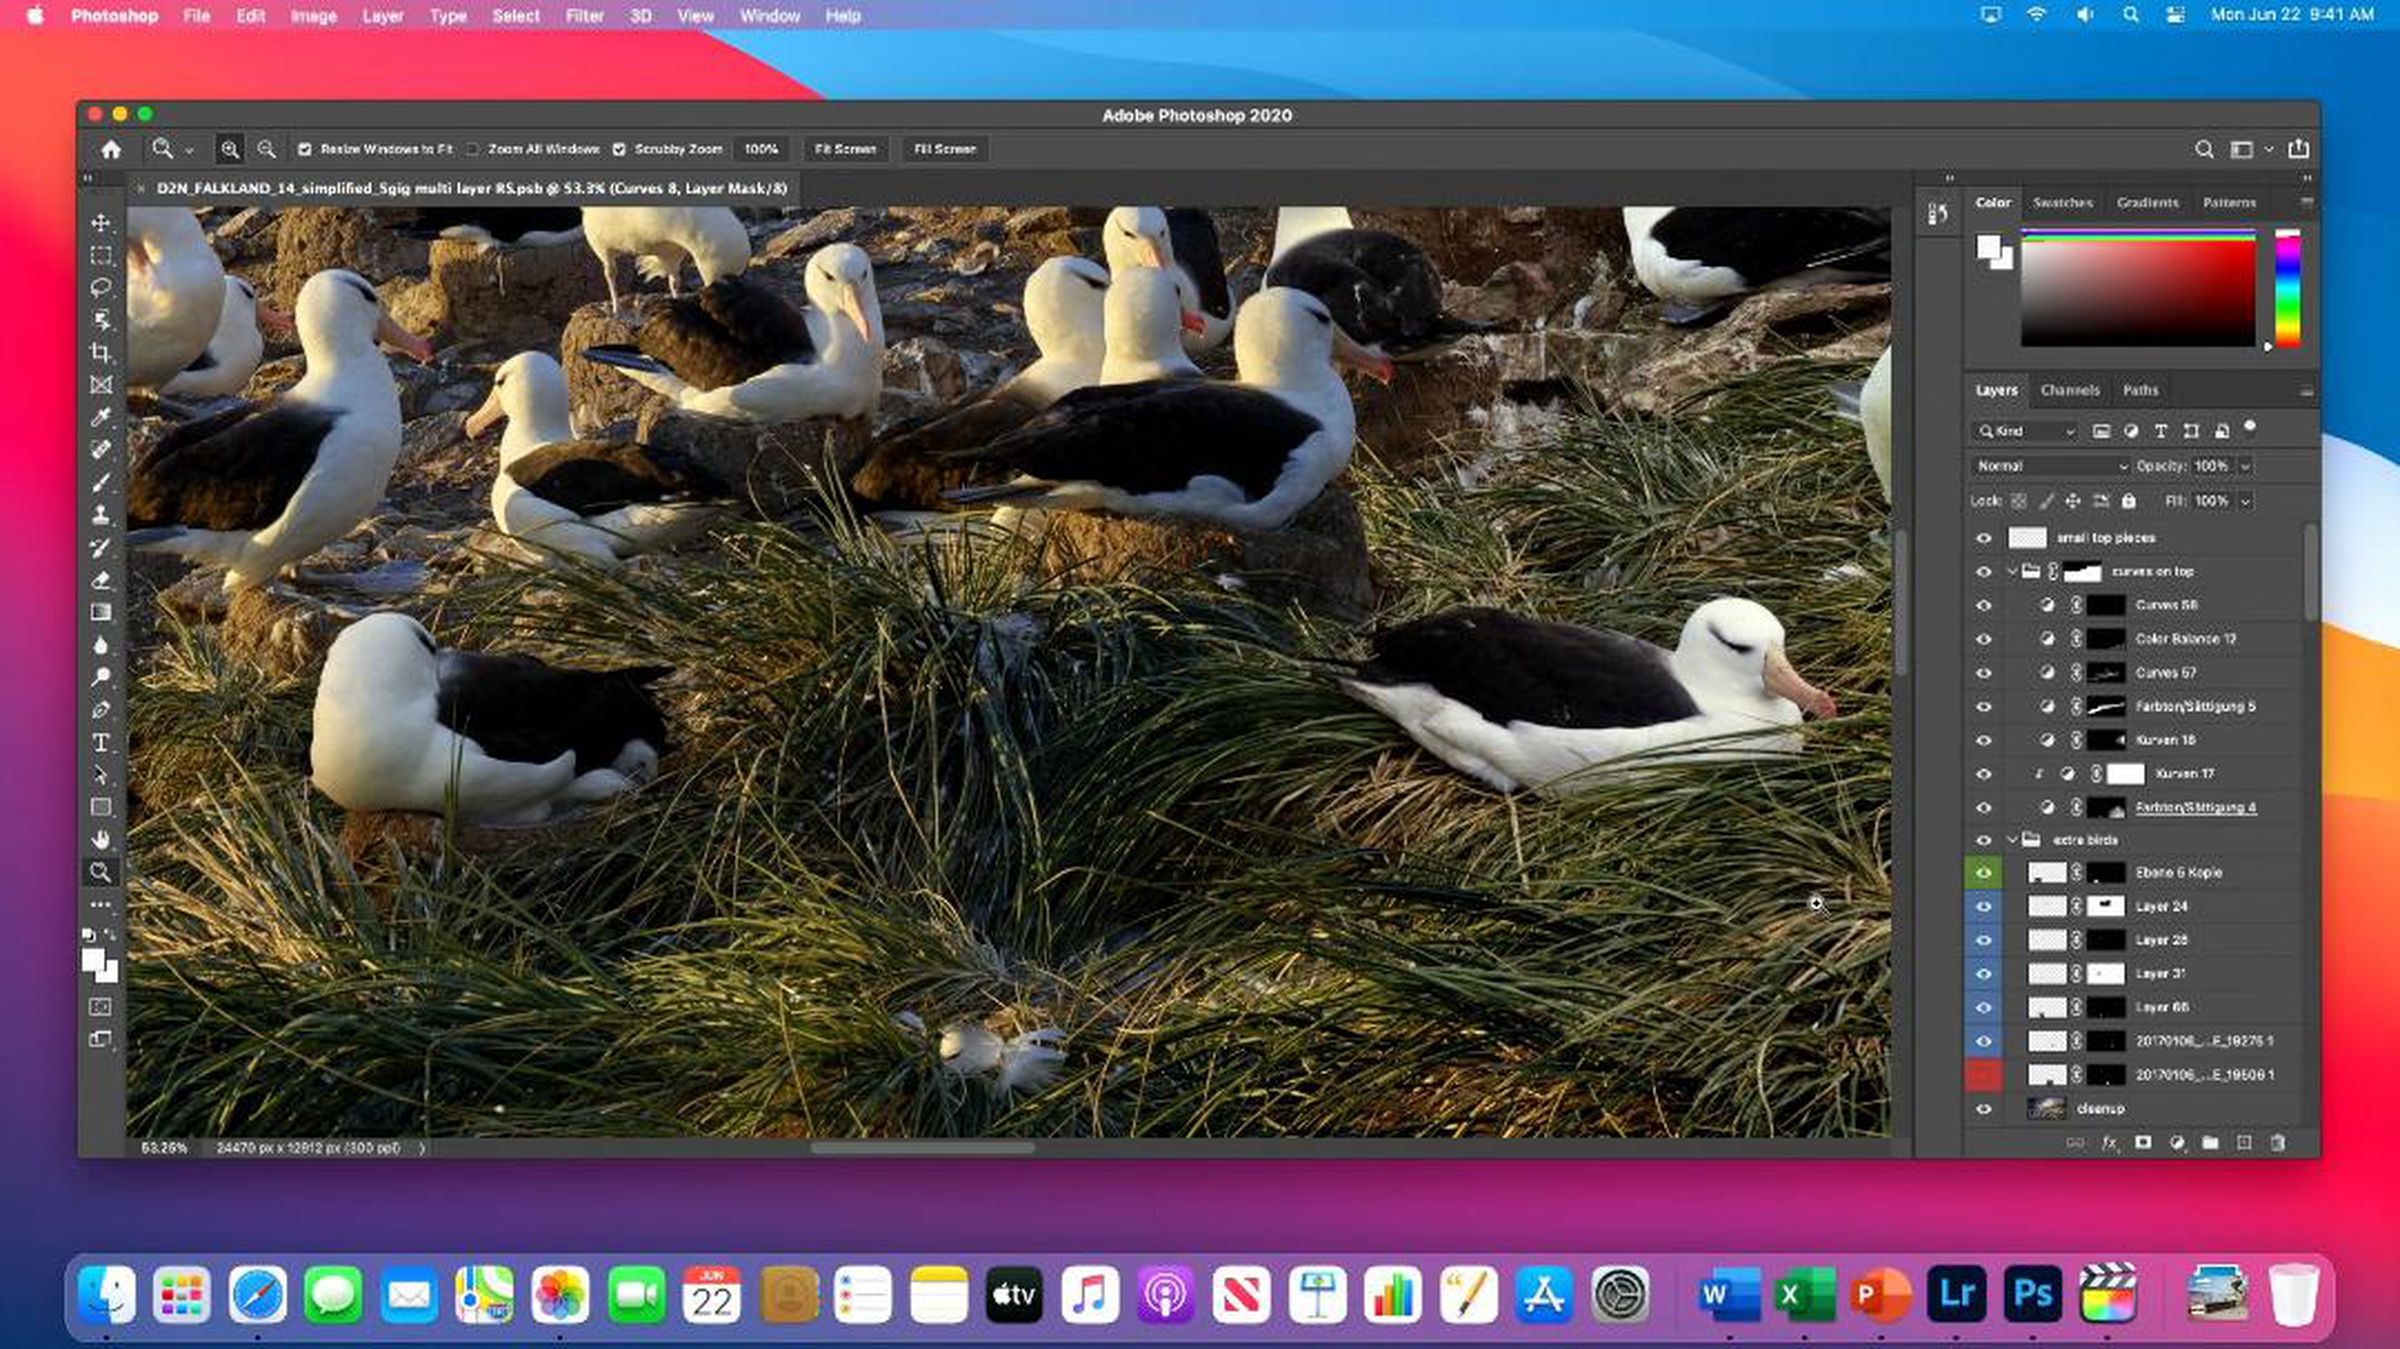 Photoshop running on Apple’s own silicon Macs.